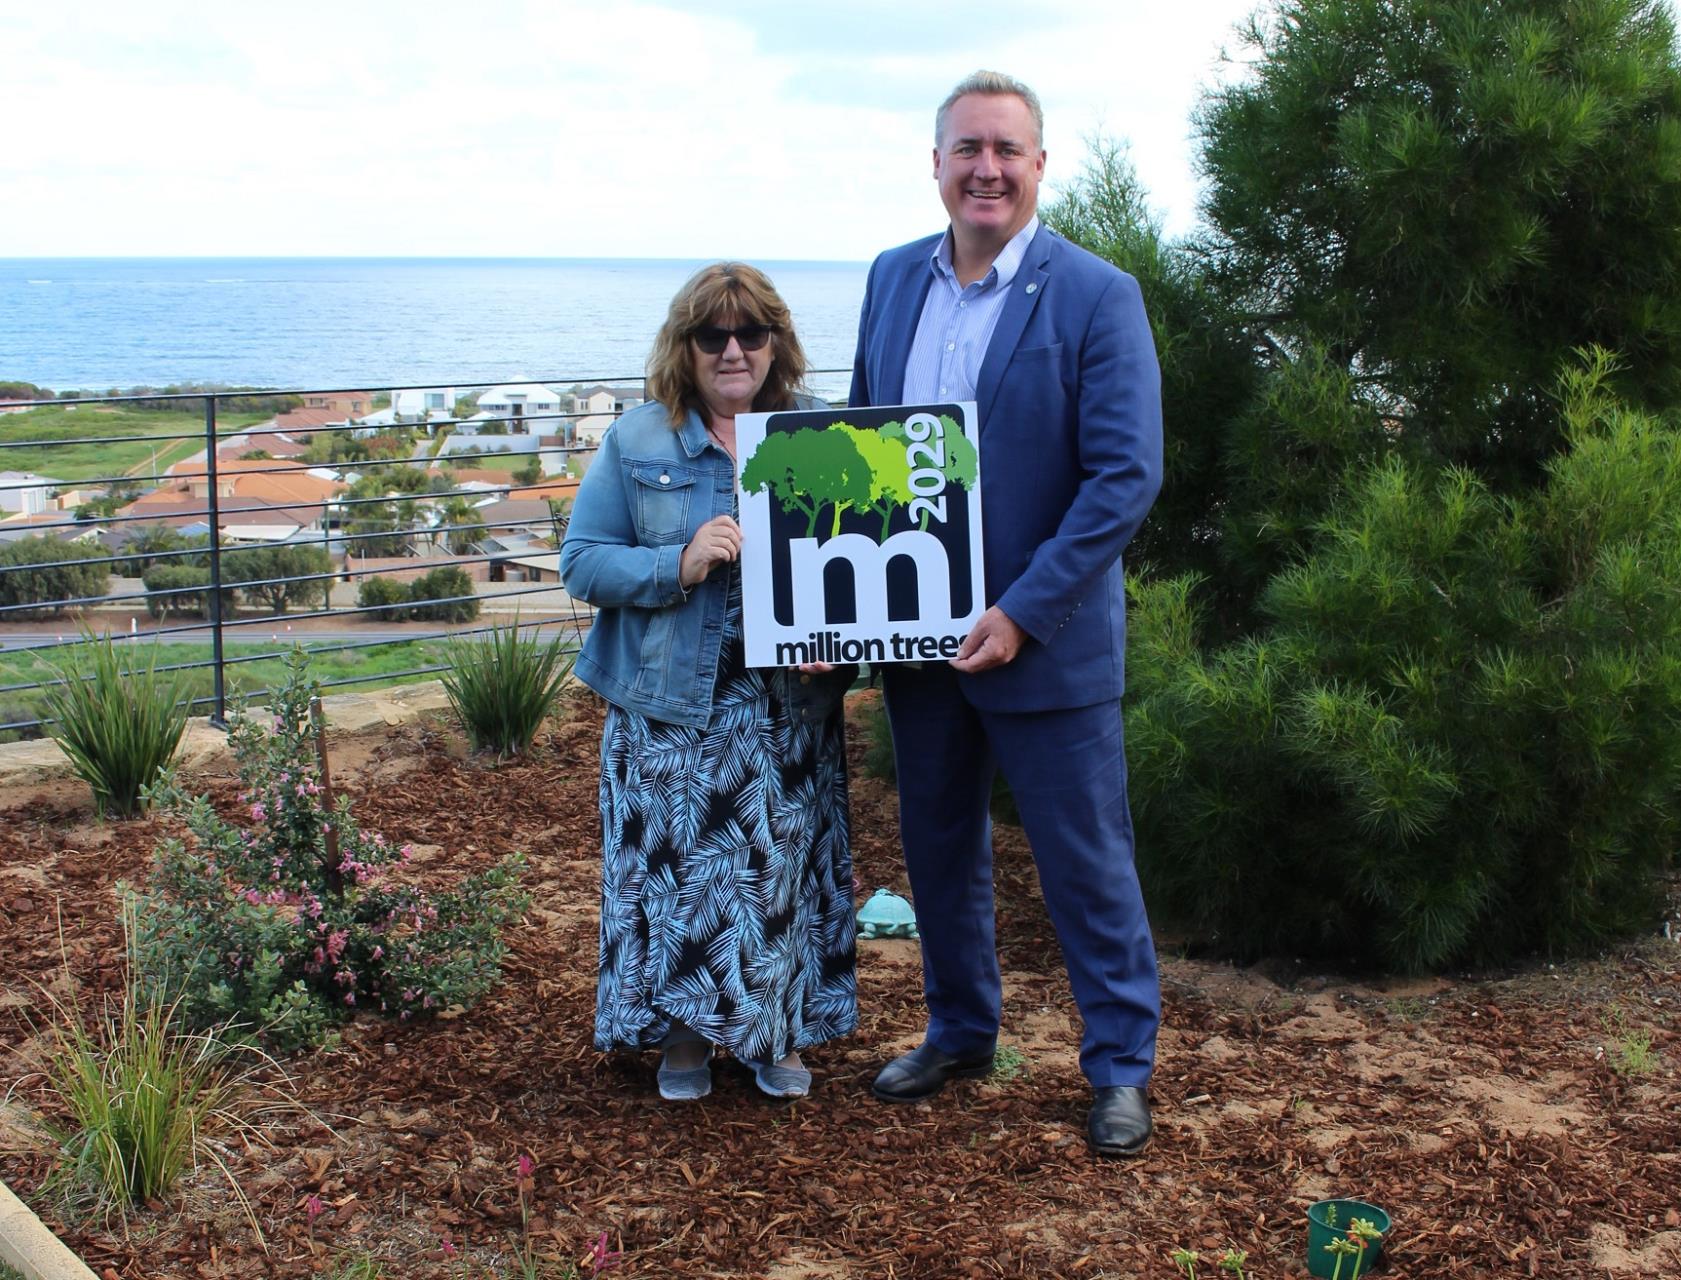 City of Greater Geraldton Mayor Shane Van Styn and Veronica Foster amidst some of the 50 trees and shrubs she planted, registered with the Million Trees project and reached the 500,000th planting milestone.